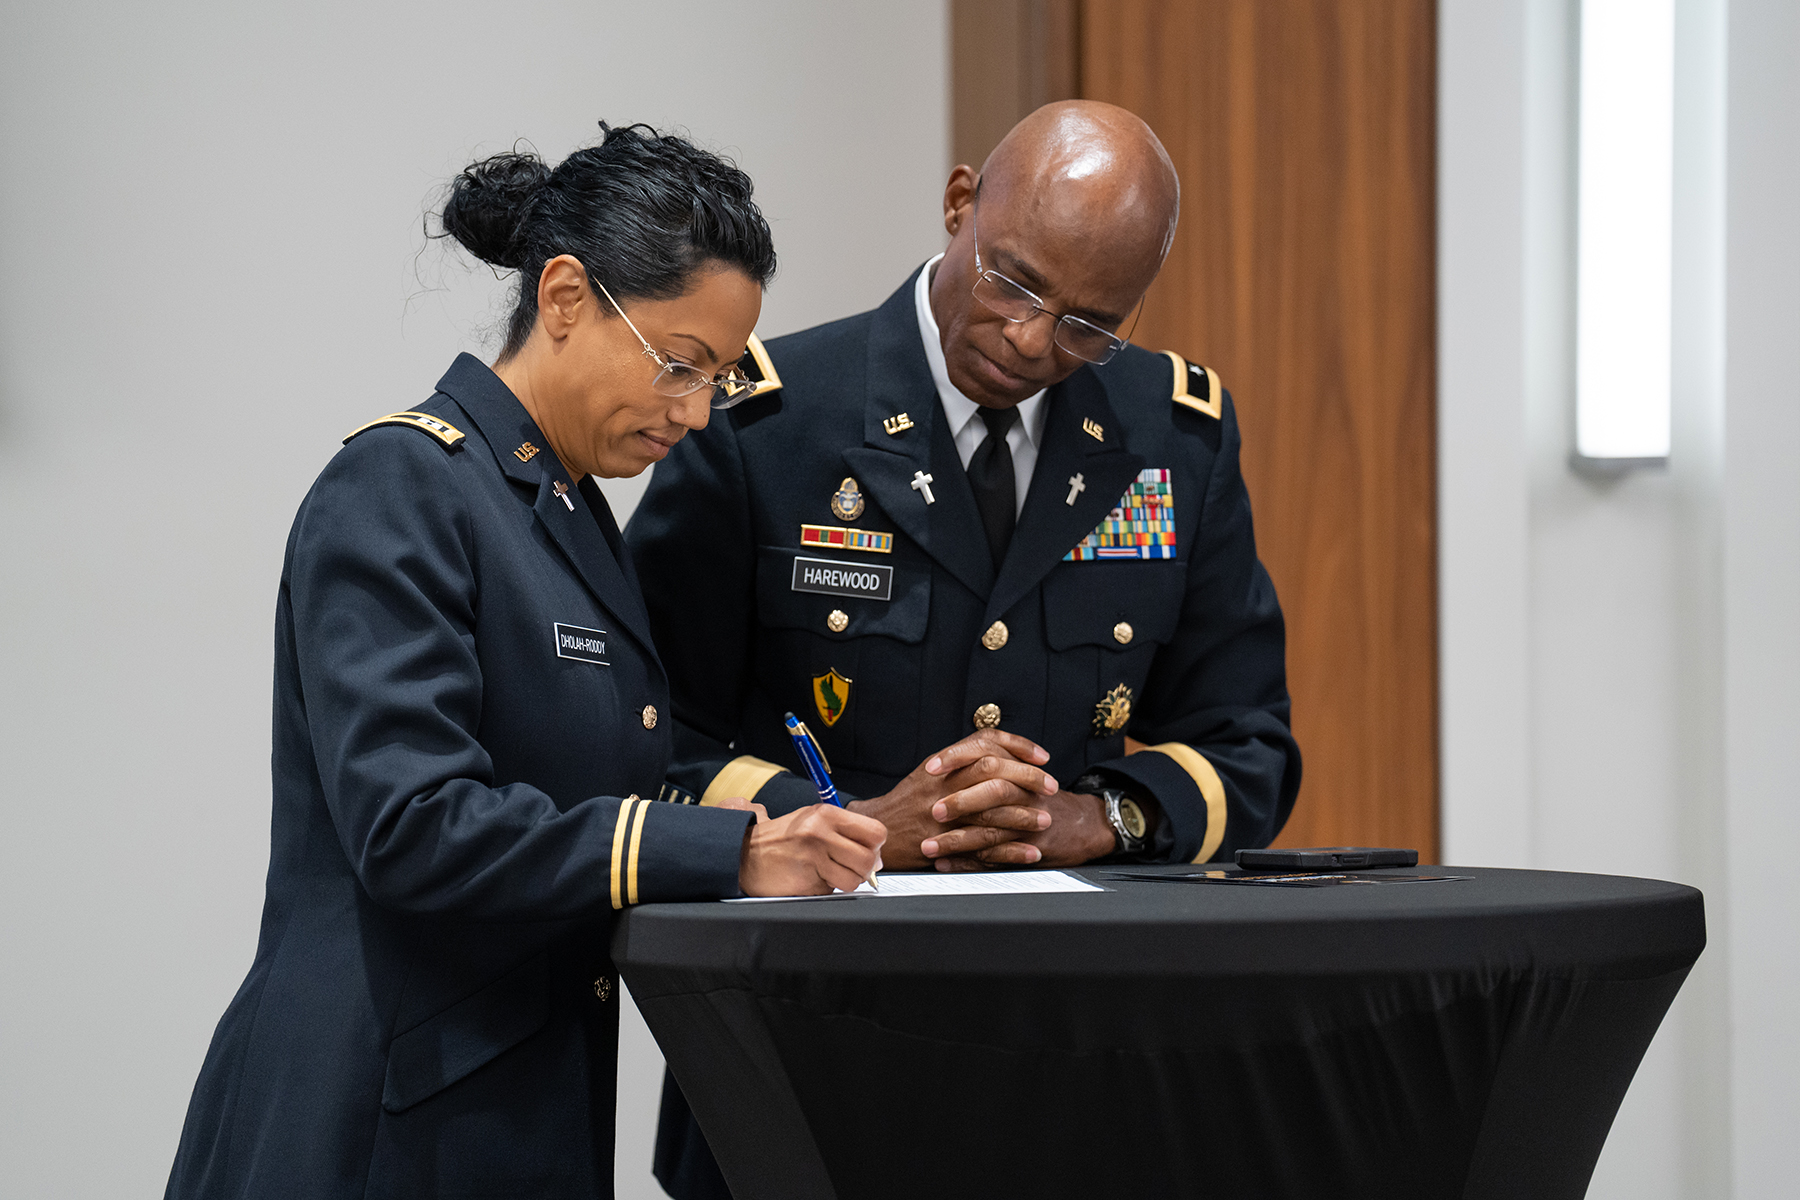 Woman with tanned skin signs a document as a black man watches. Both are in military uniform. 